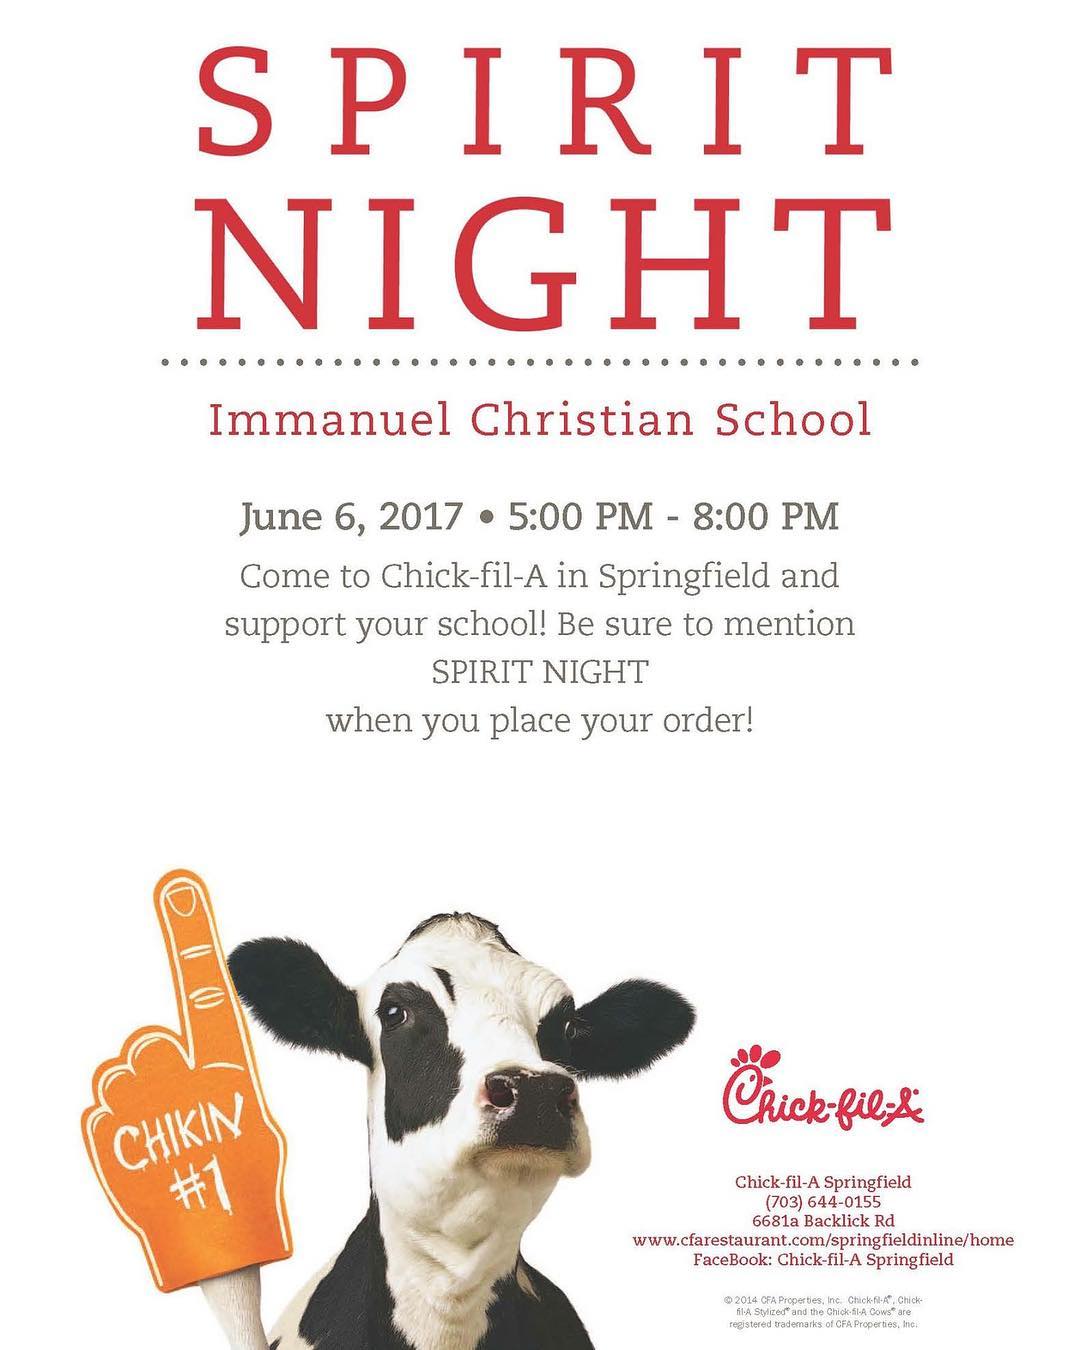 ICS SPIRIT NIGHT TONIGHT!!! Join us at the Springfield Chick-Fil-A tonight from 5:00-8:00 p.m. Mention our school when you order. Look forward to seeing you there